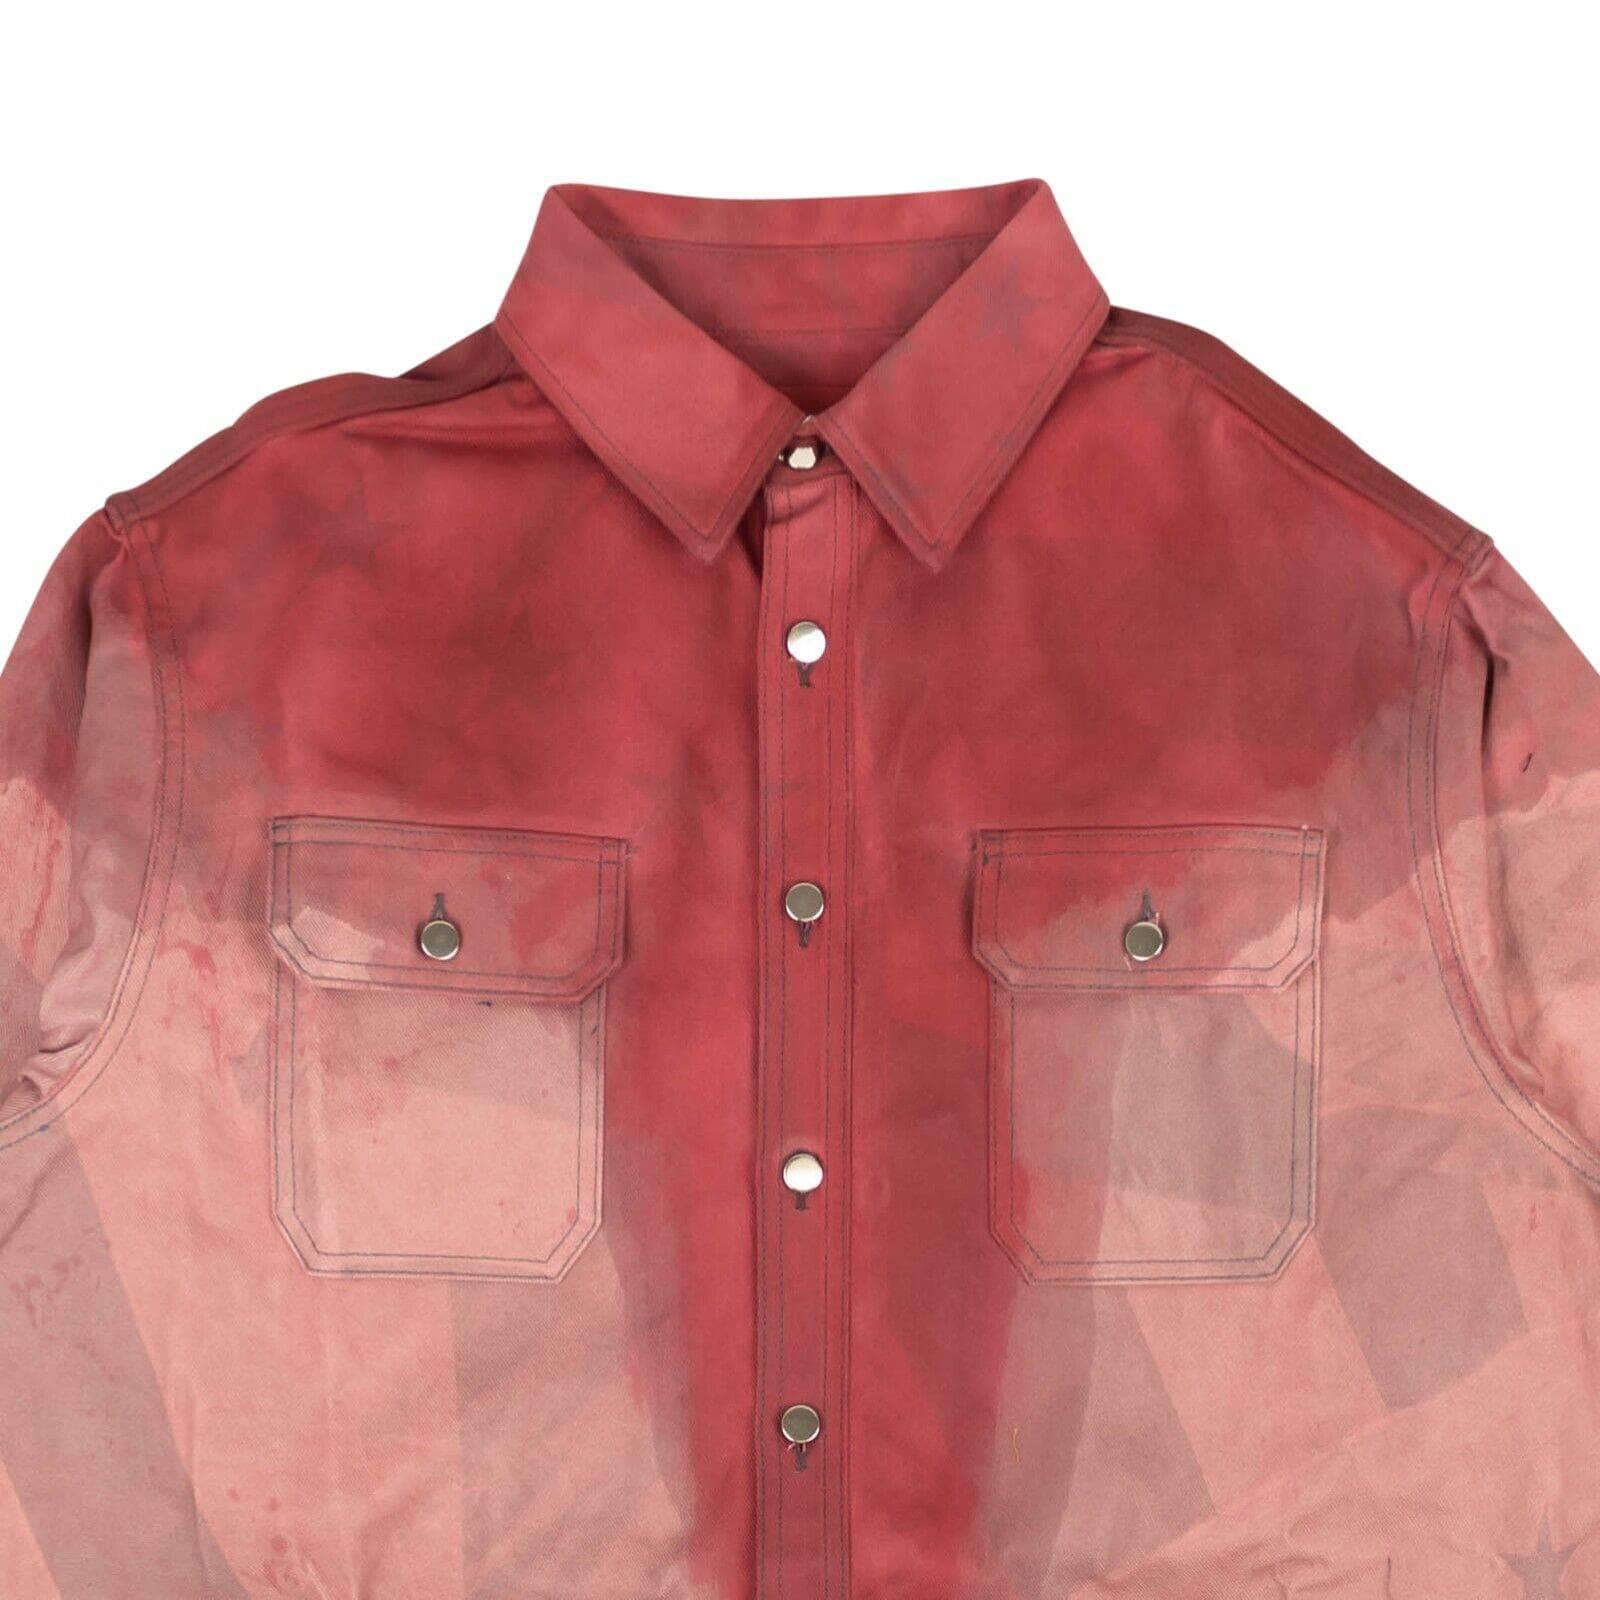 424 ON FAIRFAX 250-500, 424-on-fairfax, channelenable-all, chicmi, couponcollection, gender-mens, main-clothing, mens-shoes, size-l, size-m, size-s, size-xs Dark Pink Allover Flag Print Dye Denim Shirt